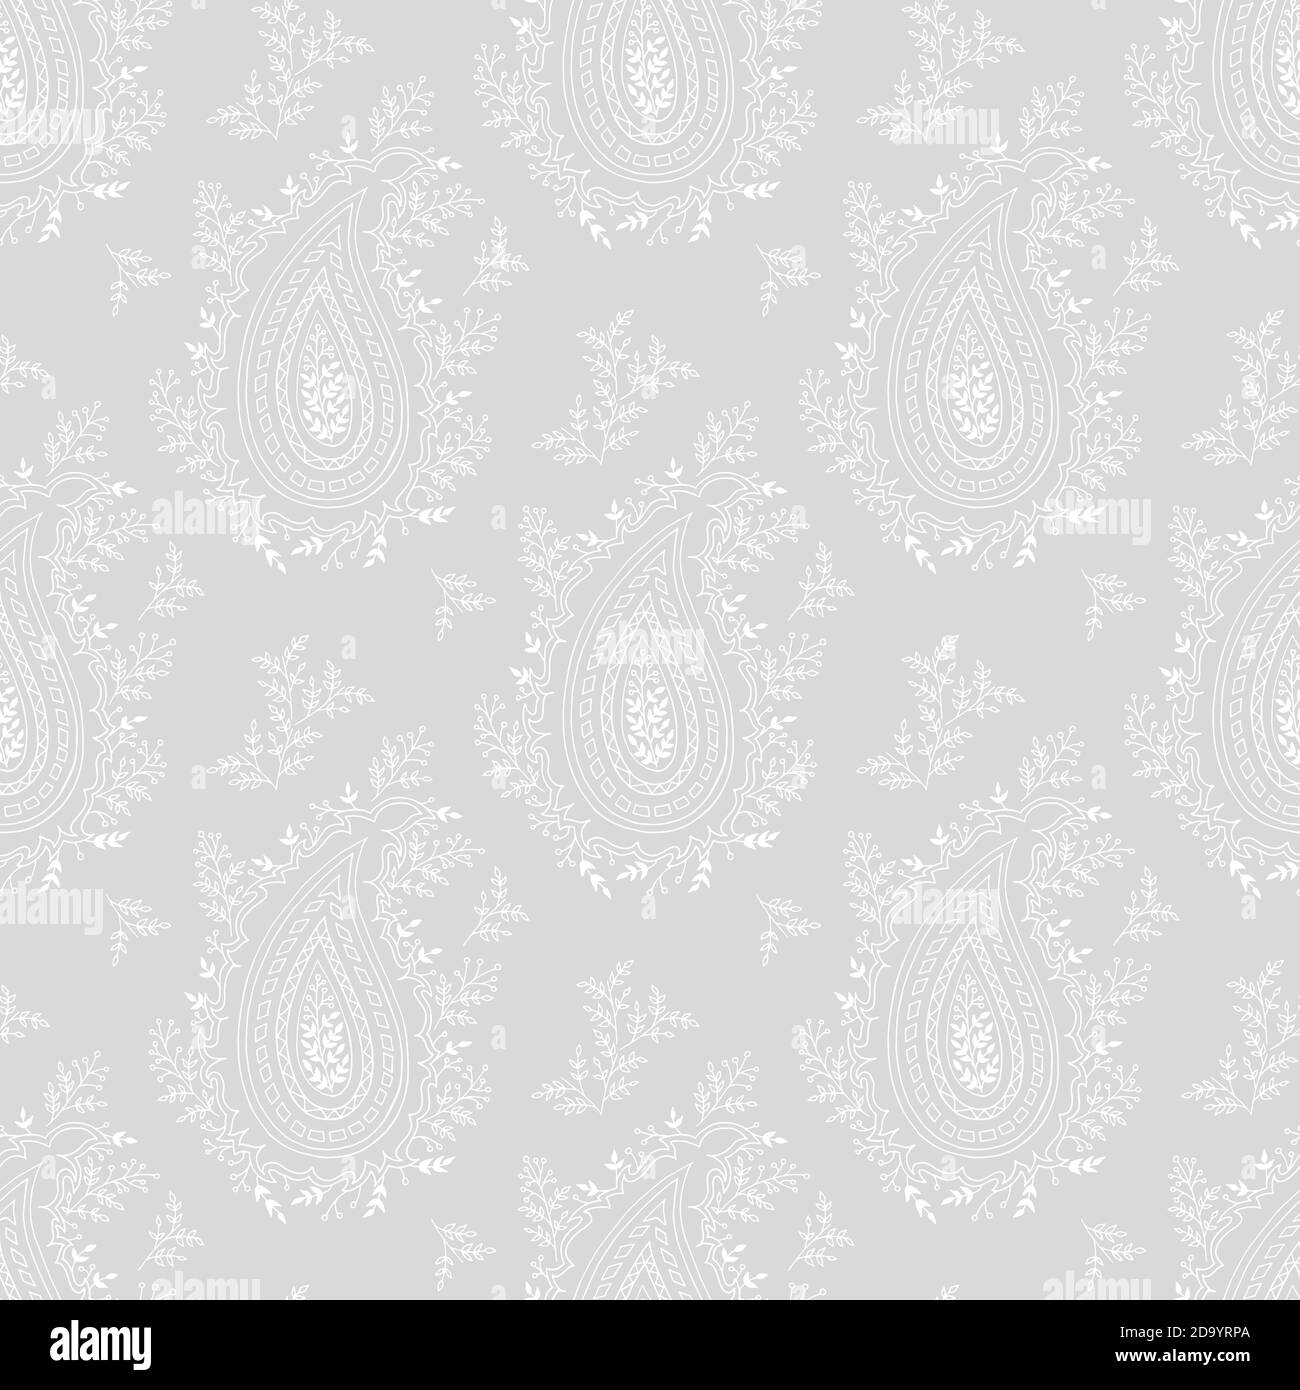 Vector paisley repeat seamless pattern. Traditional historic pattern. Trendy endless texture for digital paper, fabric, backdrops, wrapping paper and fabric. Stock Vector